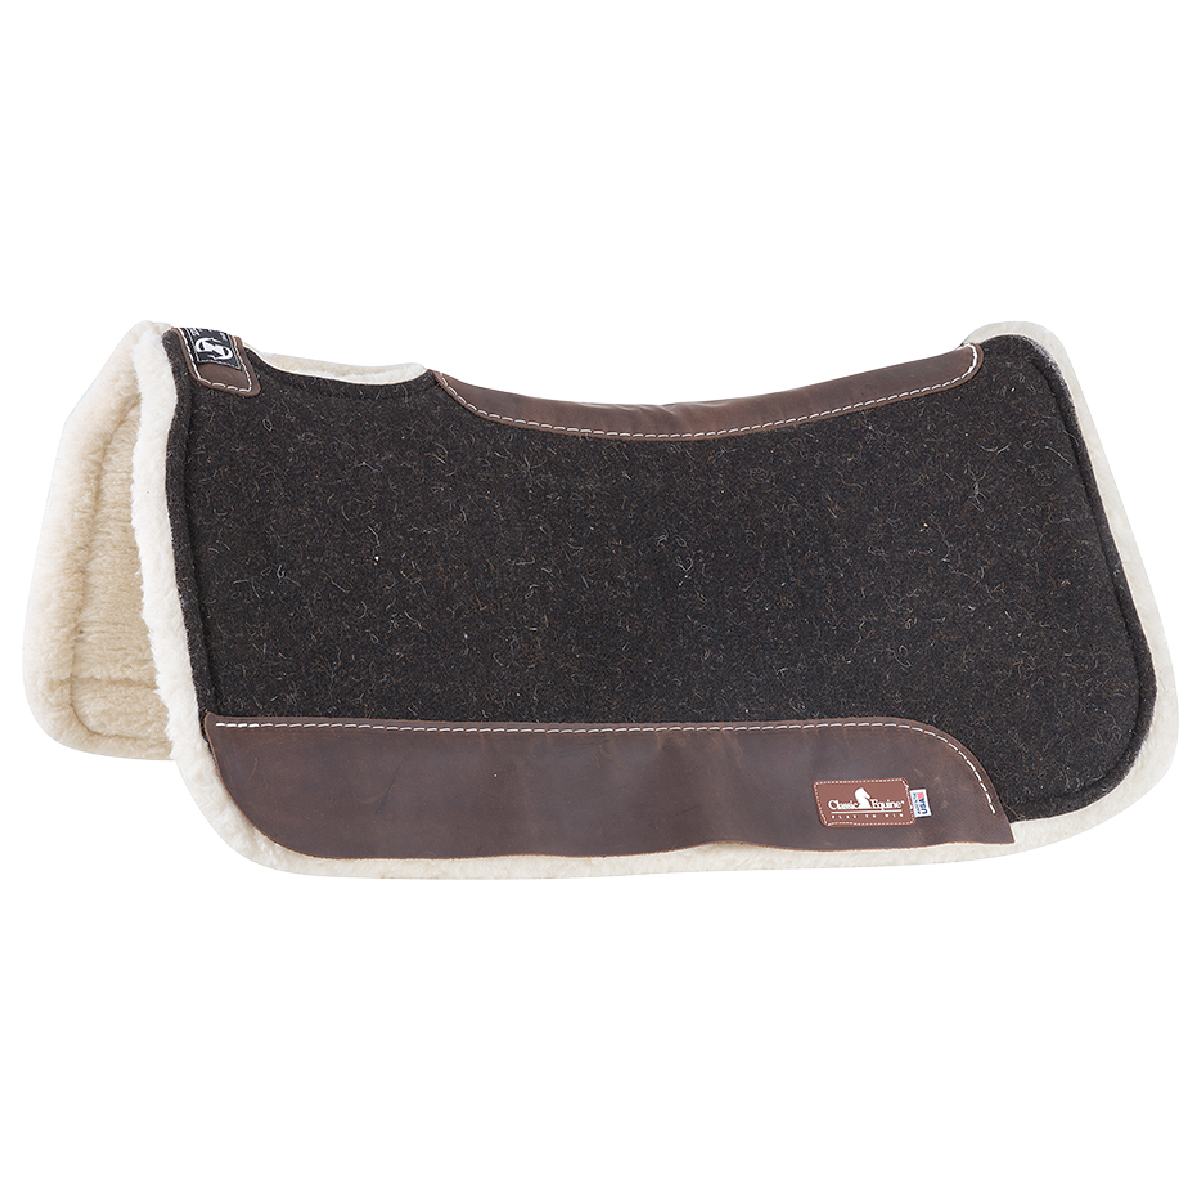 Felt or Fleece Zone Pad from Equibrand